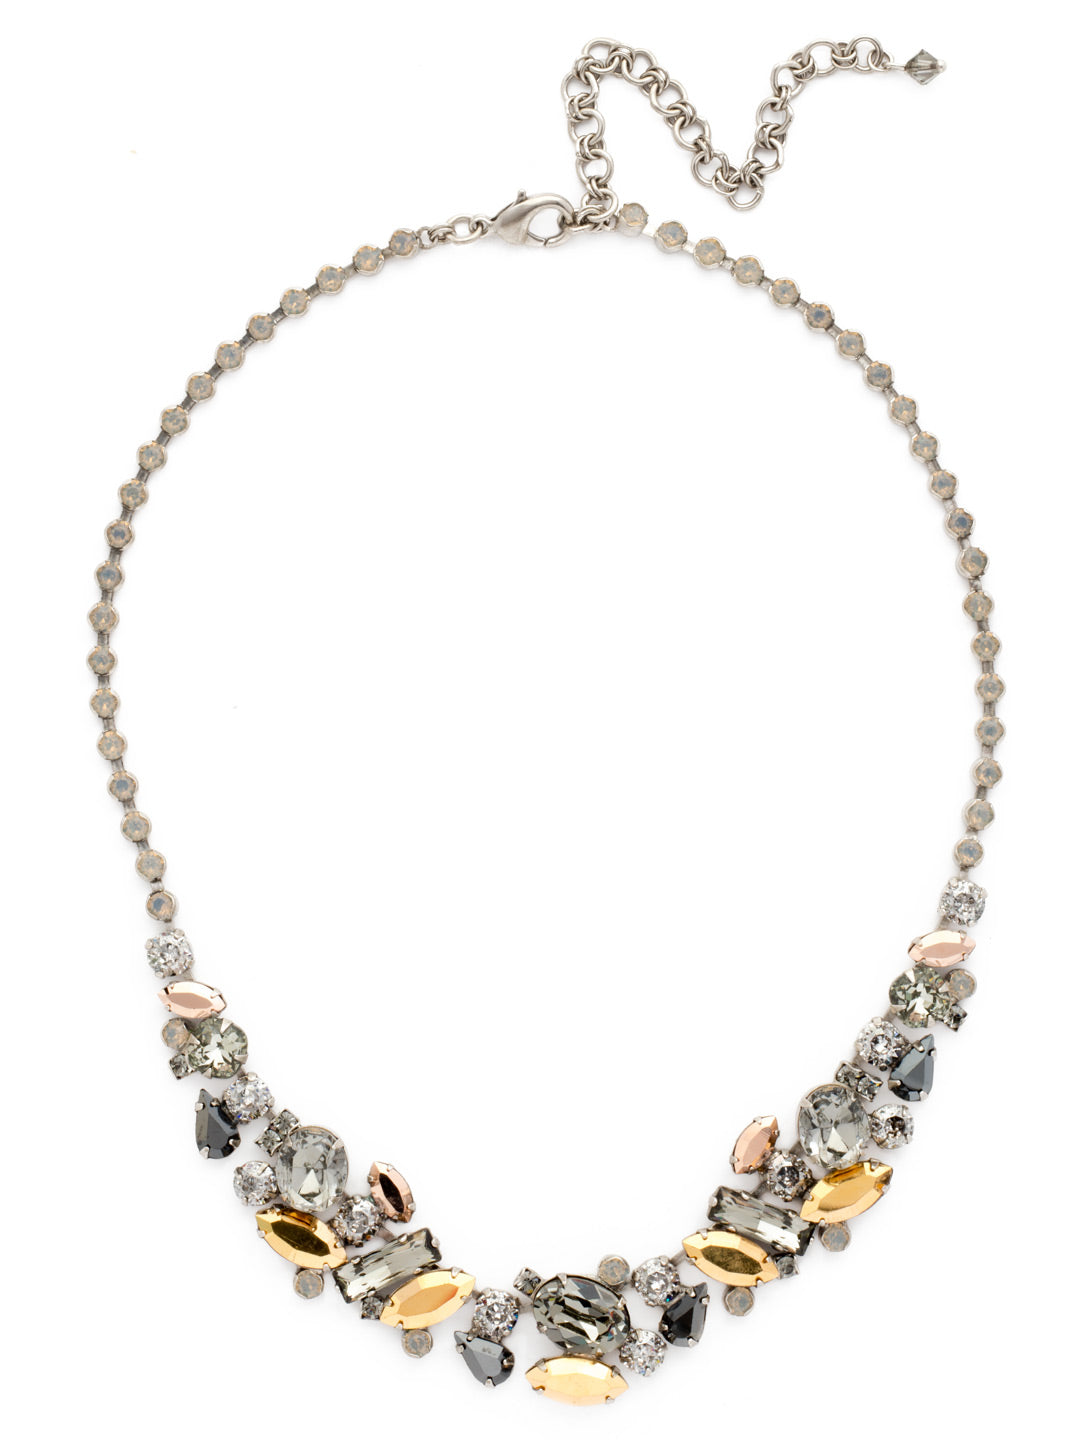 Abstract Crystal Collar Necklace - NDG11ASGV - Stunning clusters of round, navette, pear, oval and cushion cut crystals make this necklace a stand-out by any standards! A rhinestone chain completes this design for all around sparkle.